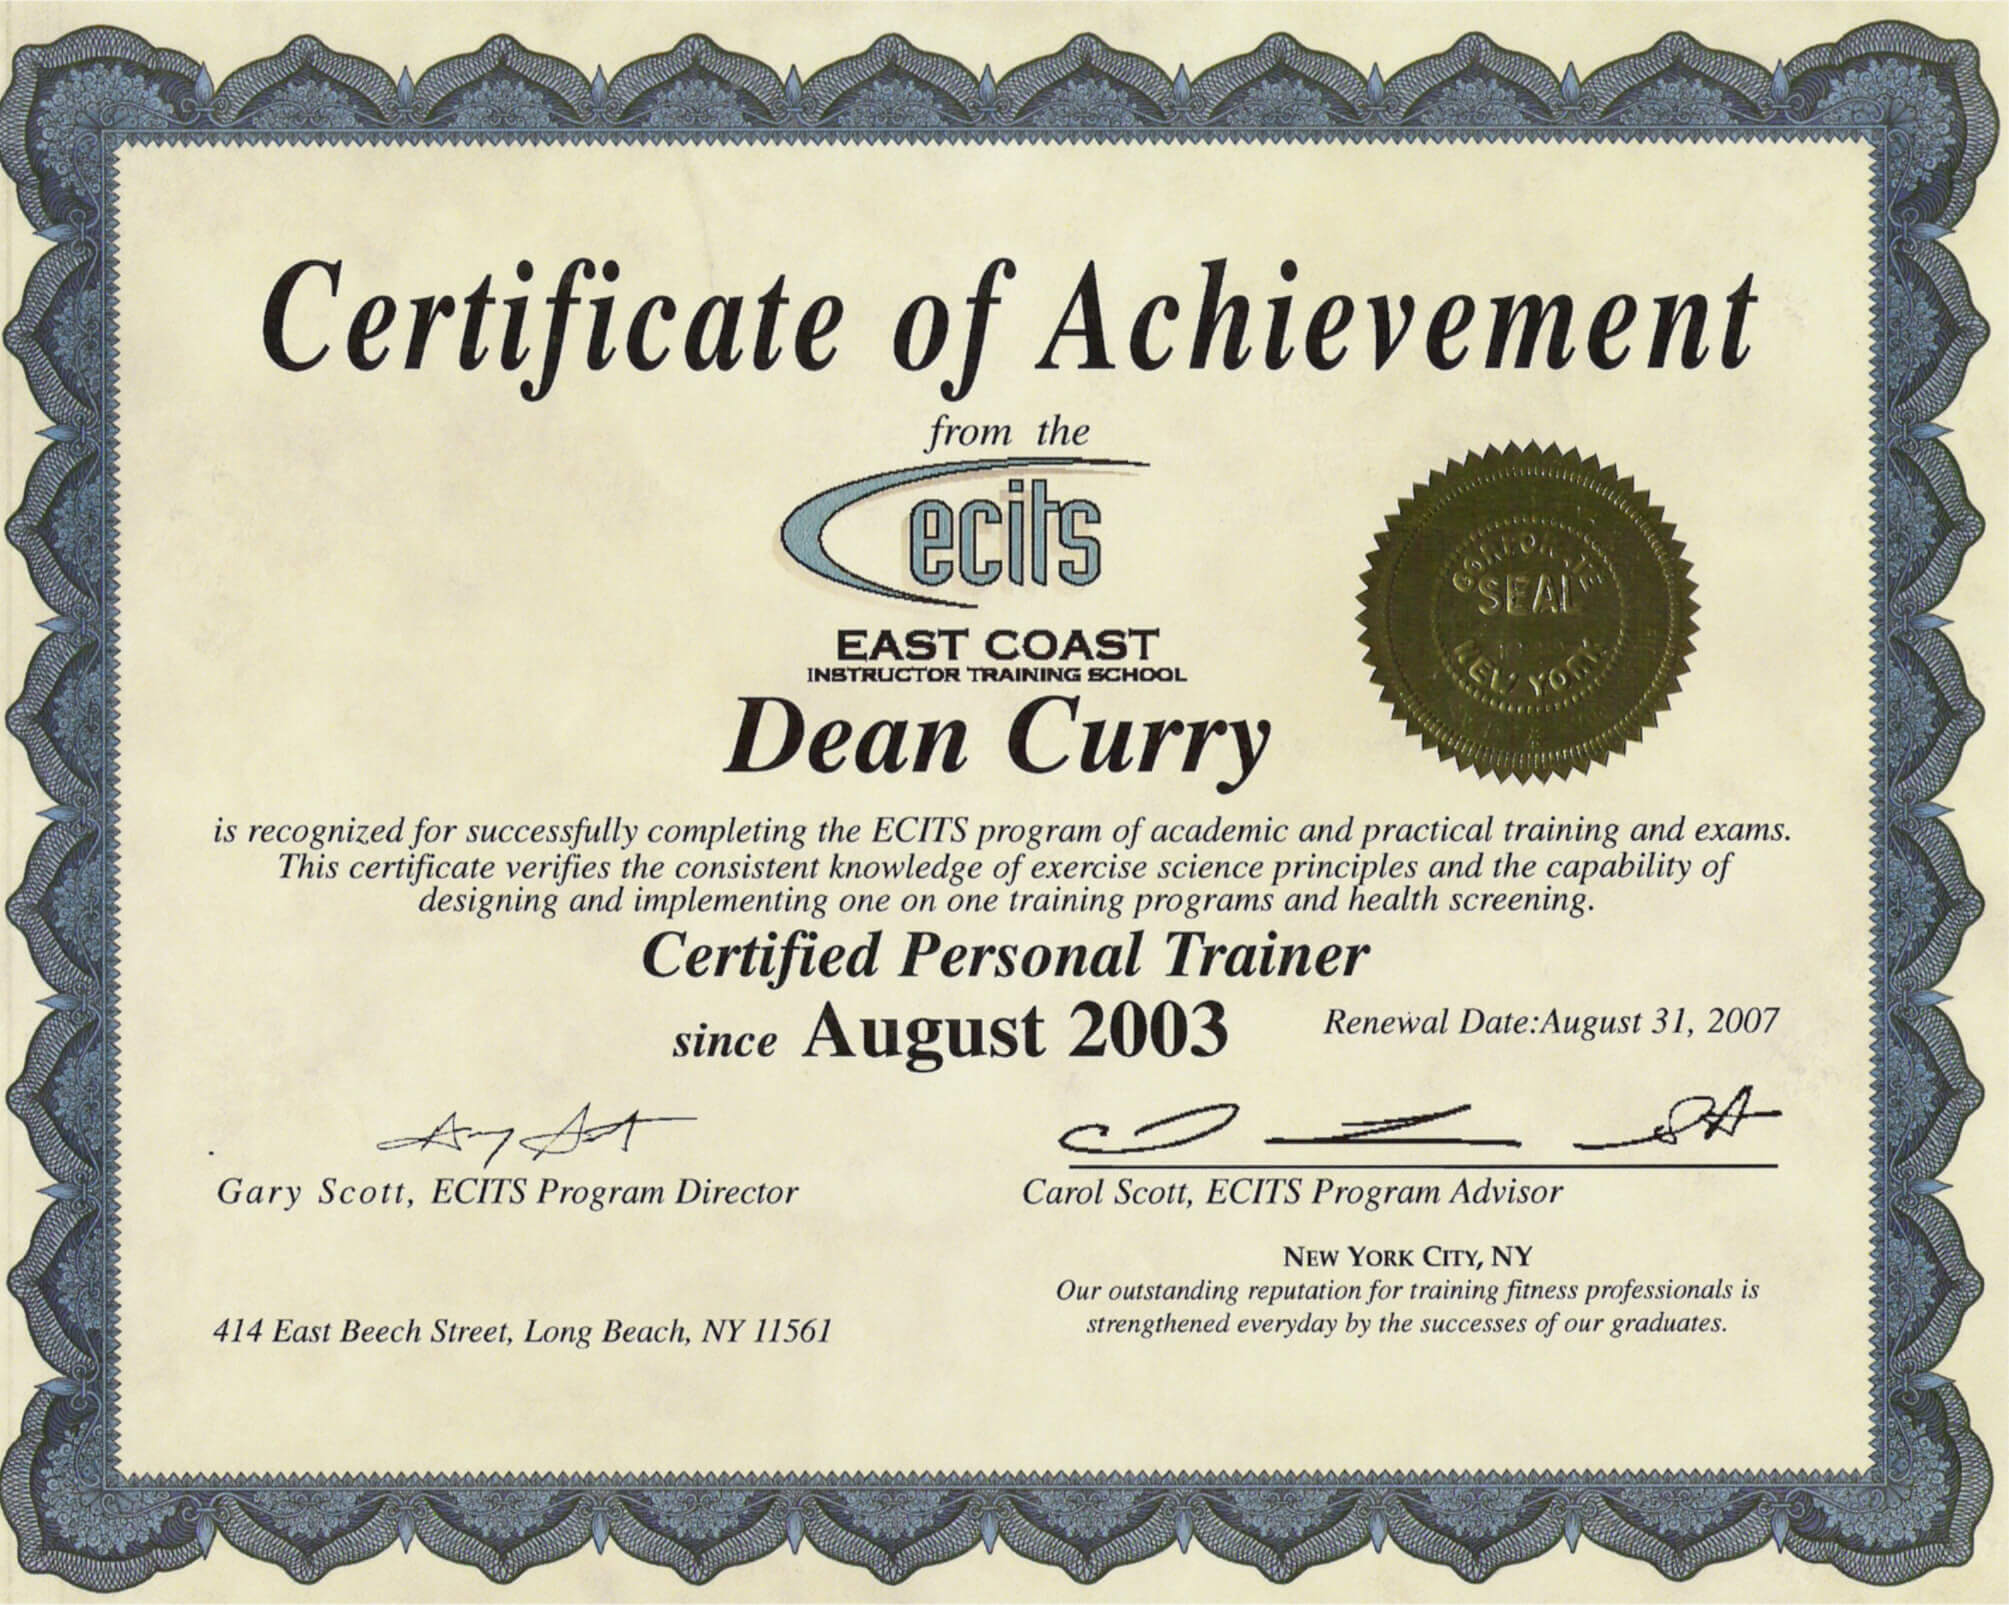 Certificate Of Achievement Army Template ] – Army Inside Certificate Of Achievement Army Template